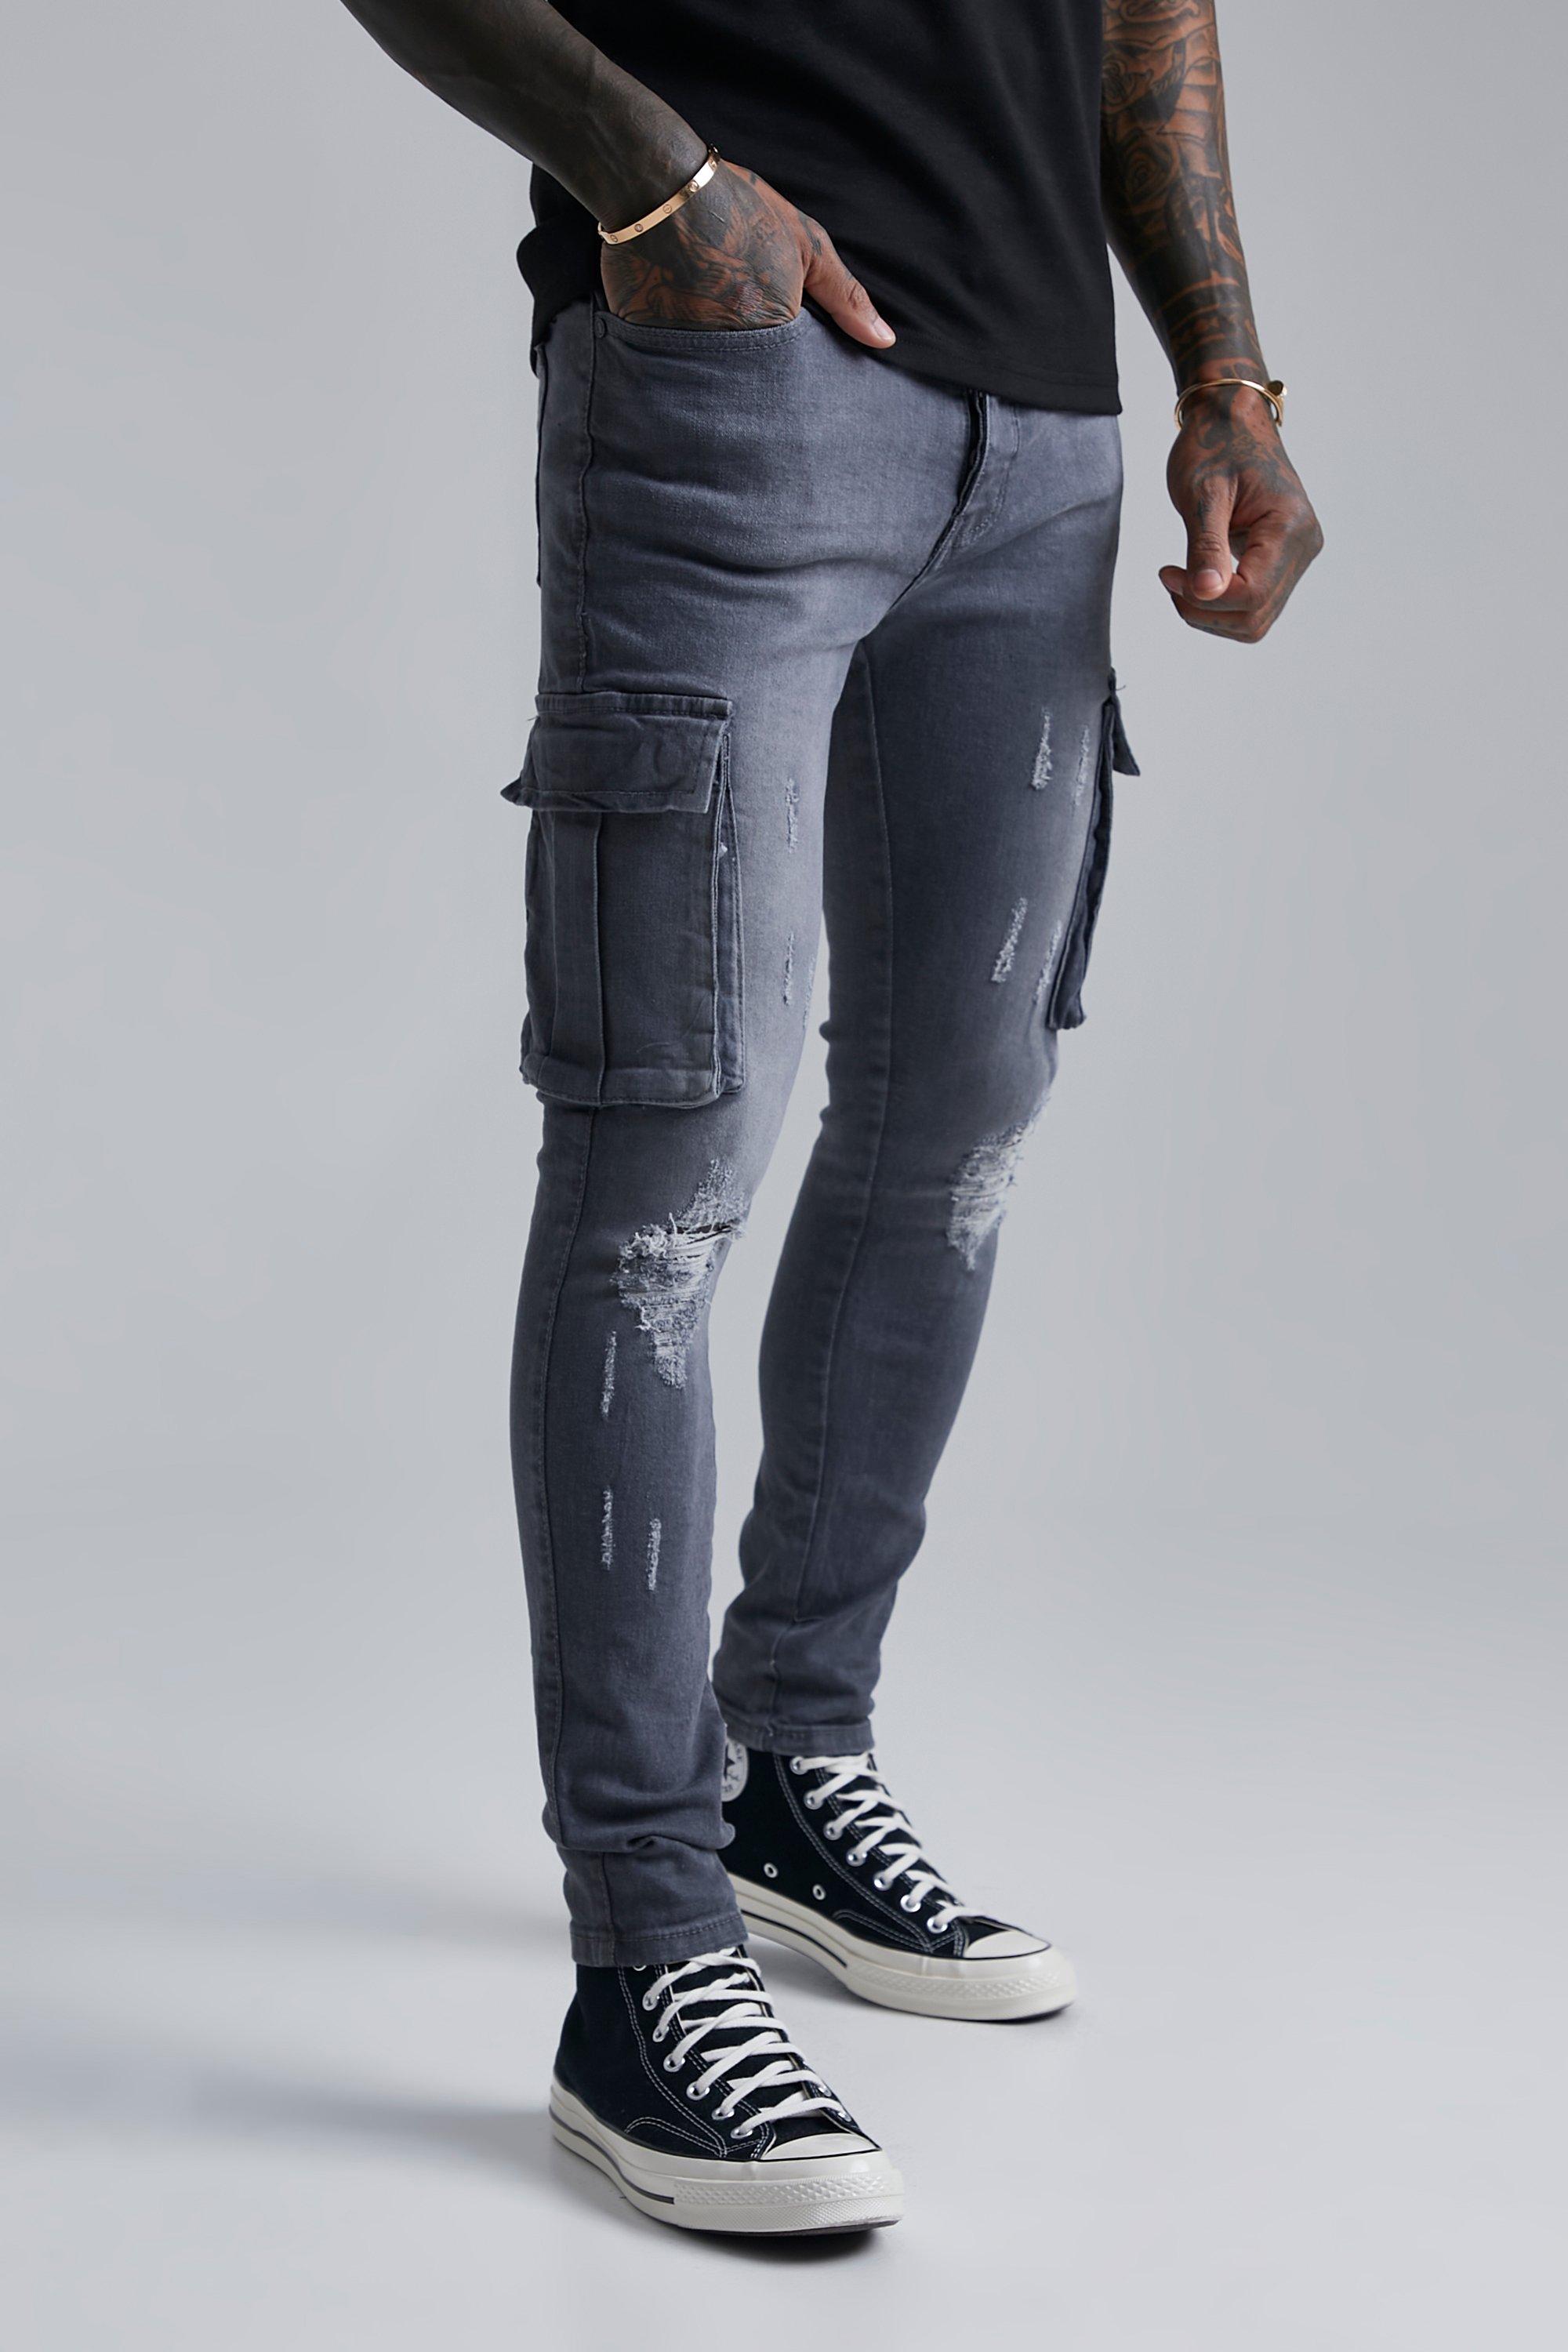 Confronteren klif pols Super Skinny Cargo Jeans With Knee Rips | boohooMAN USA